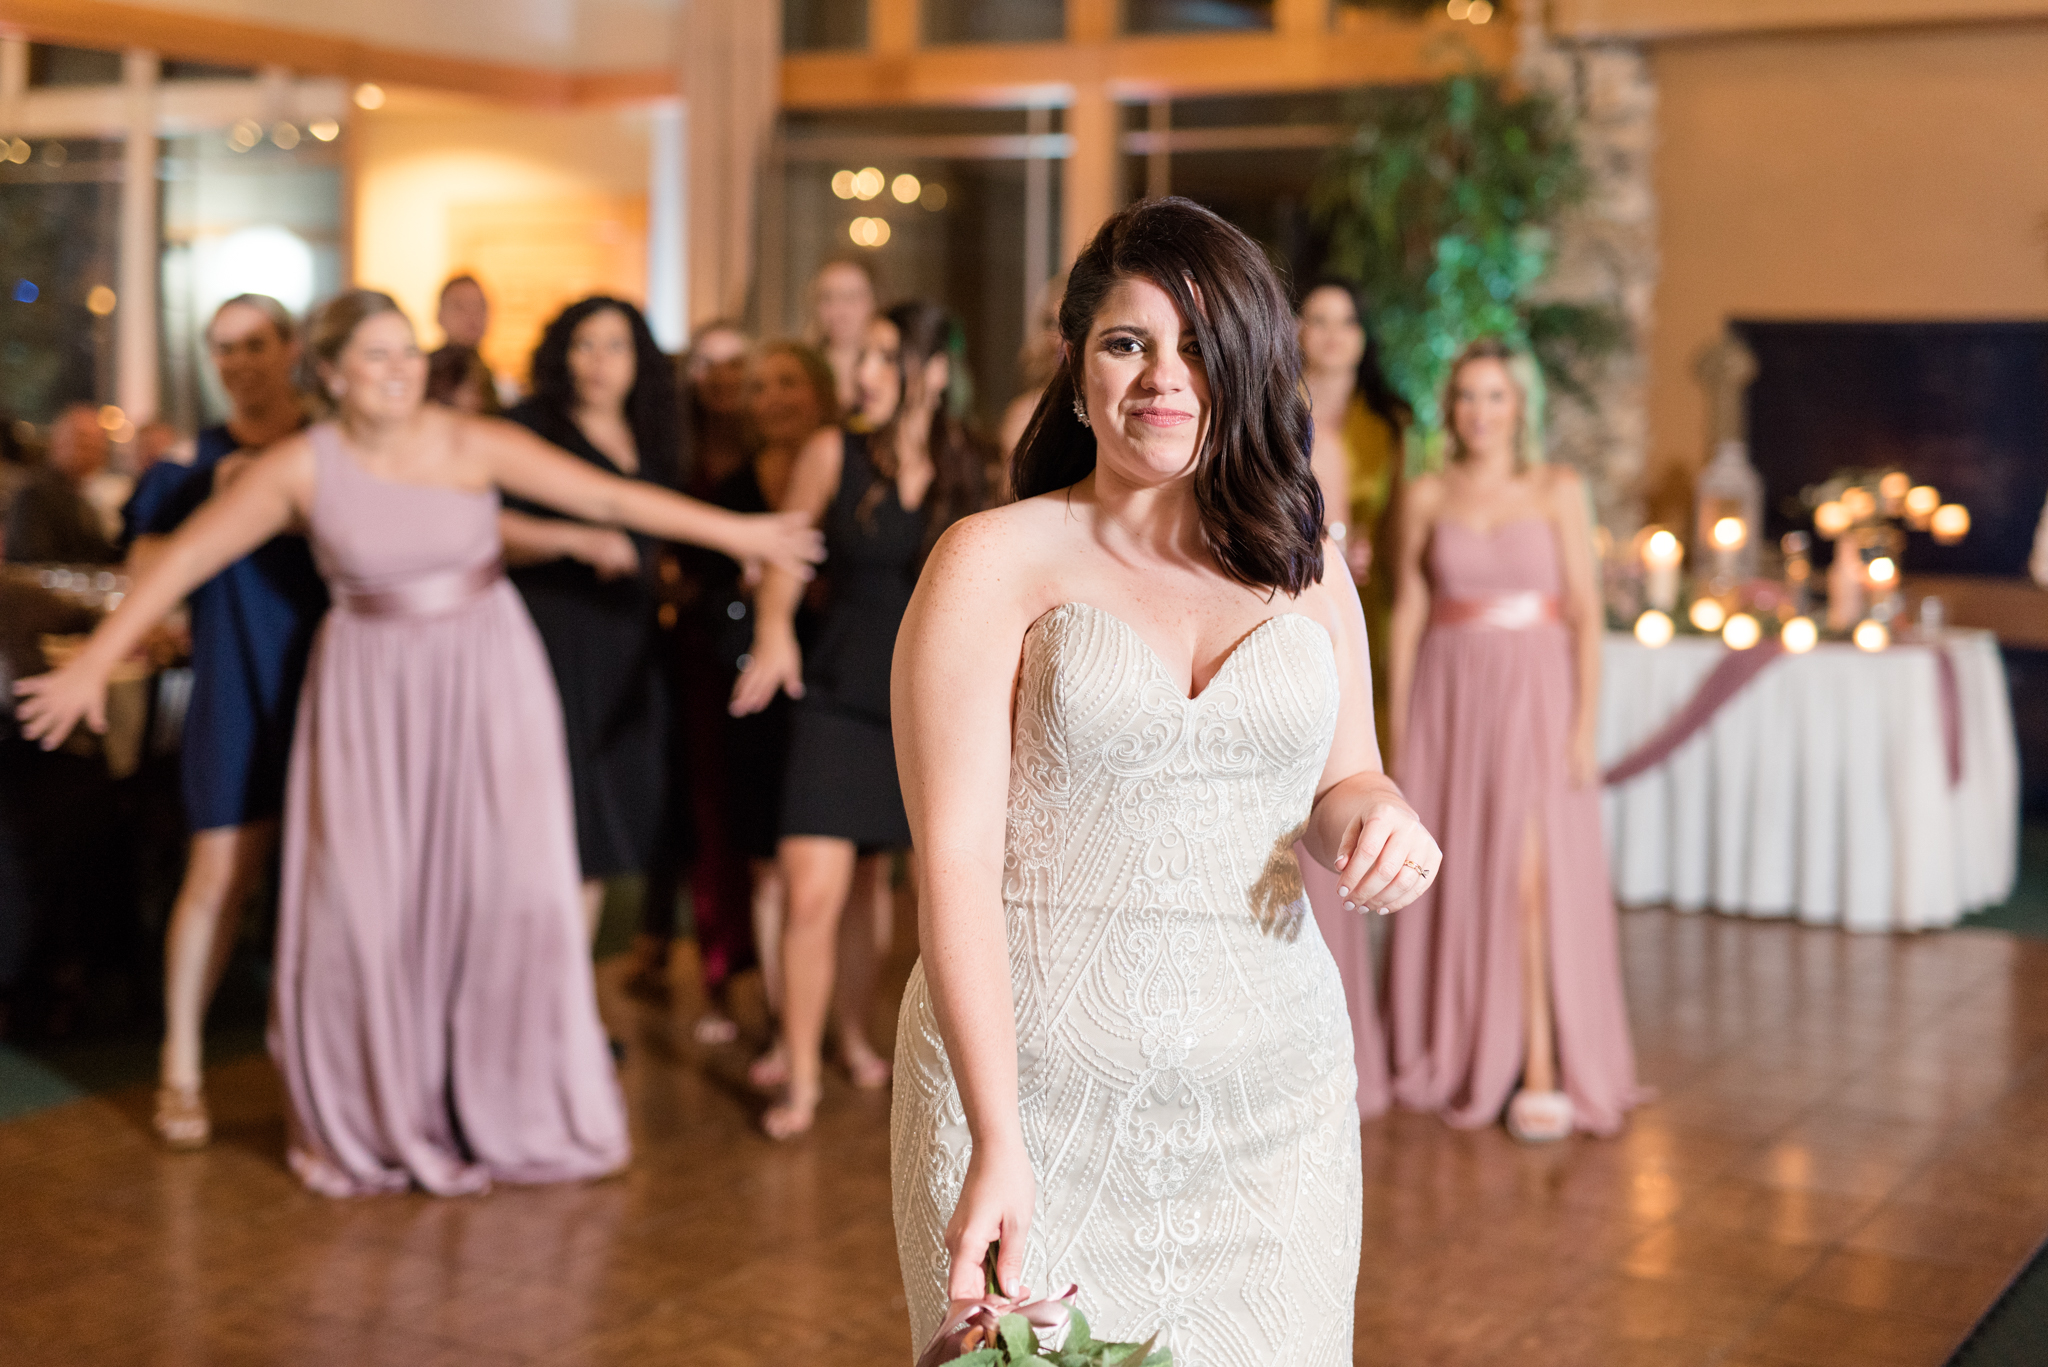 Bride gets ready to throw bouquet.